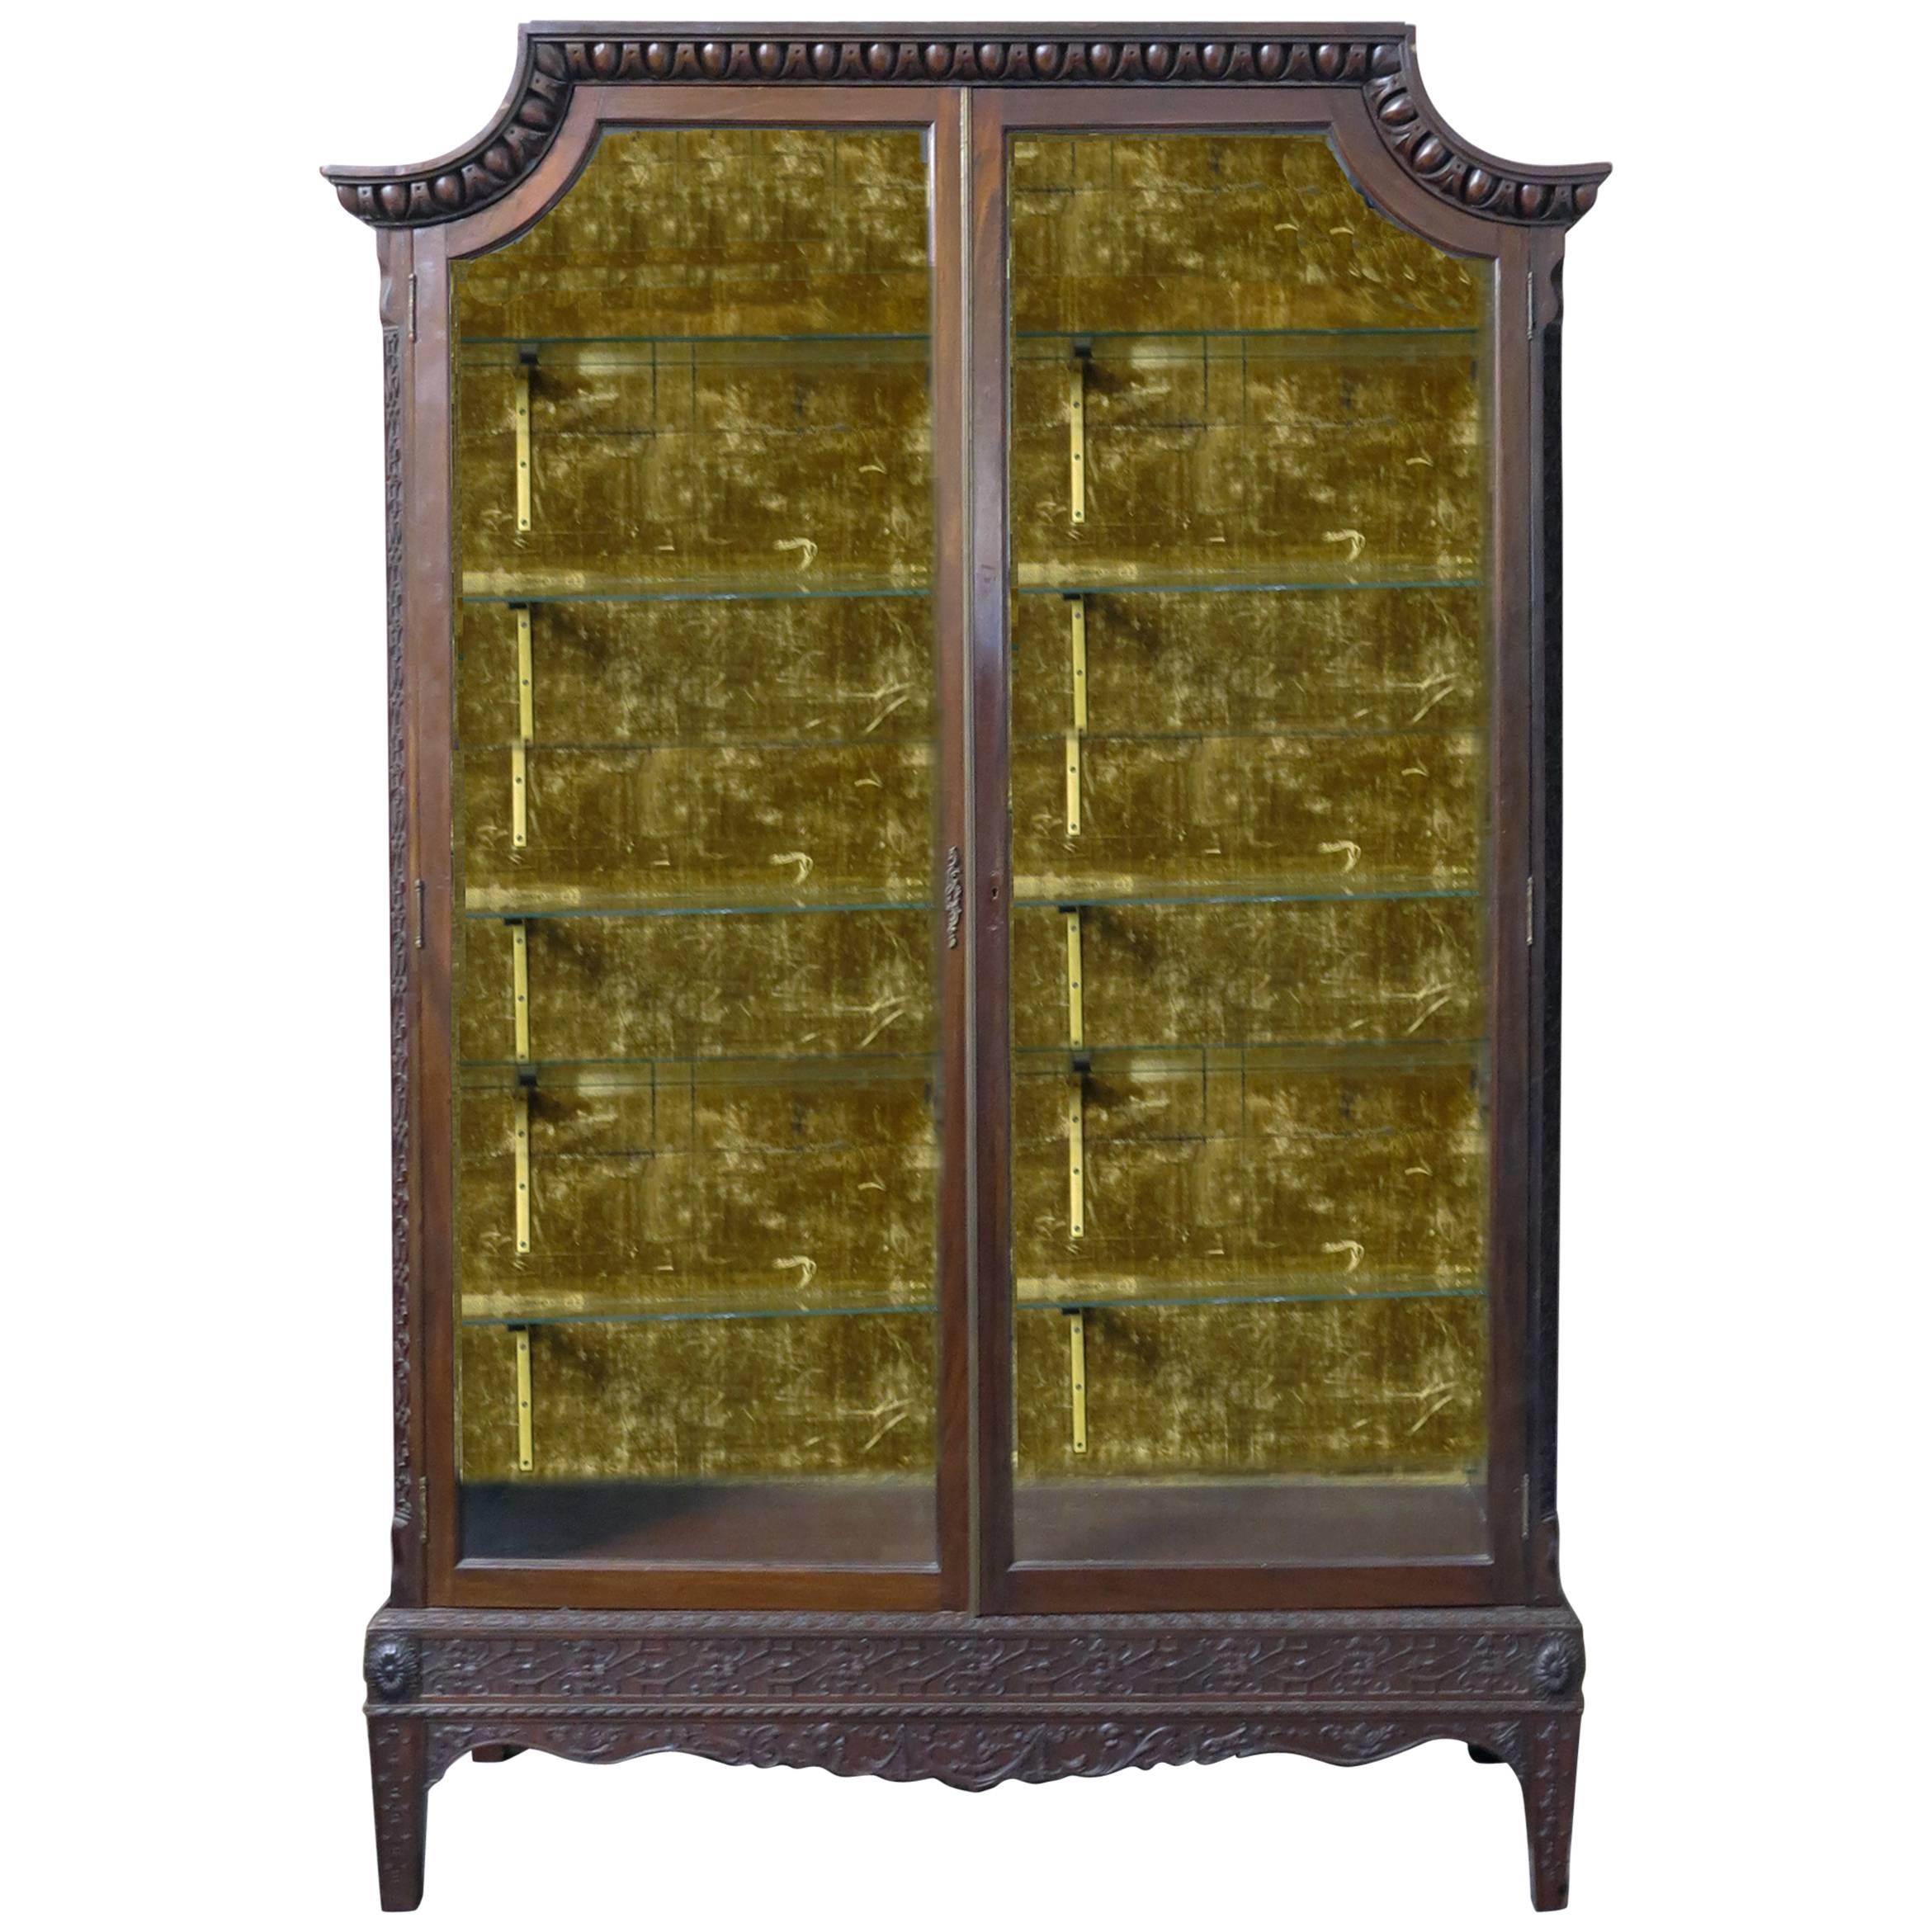 Chinese Chippendale Mahogany Display Cabinet Turn of the Century